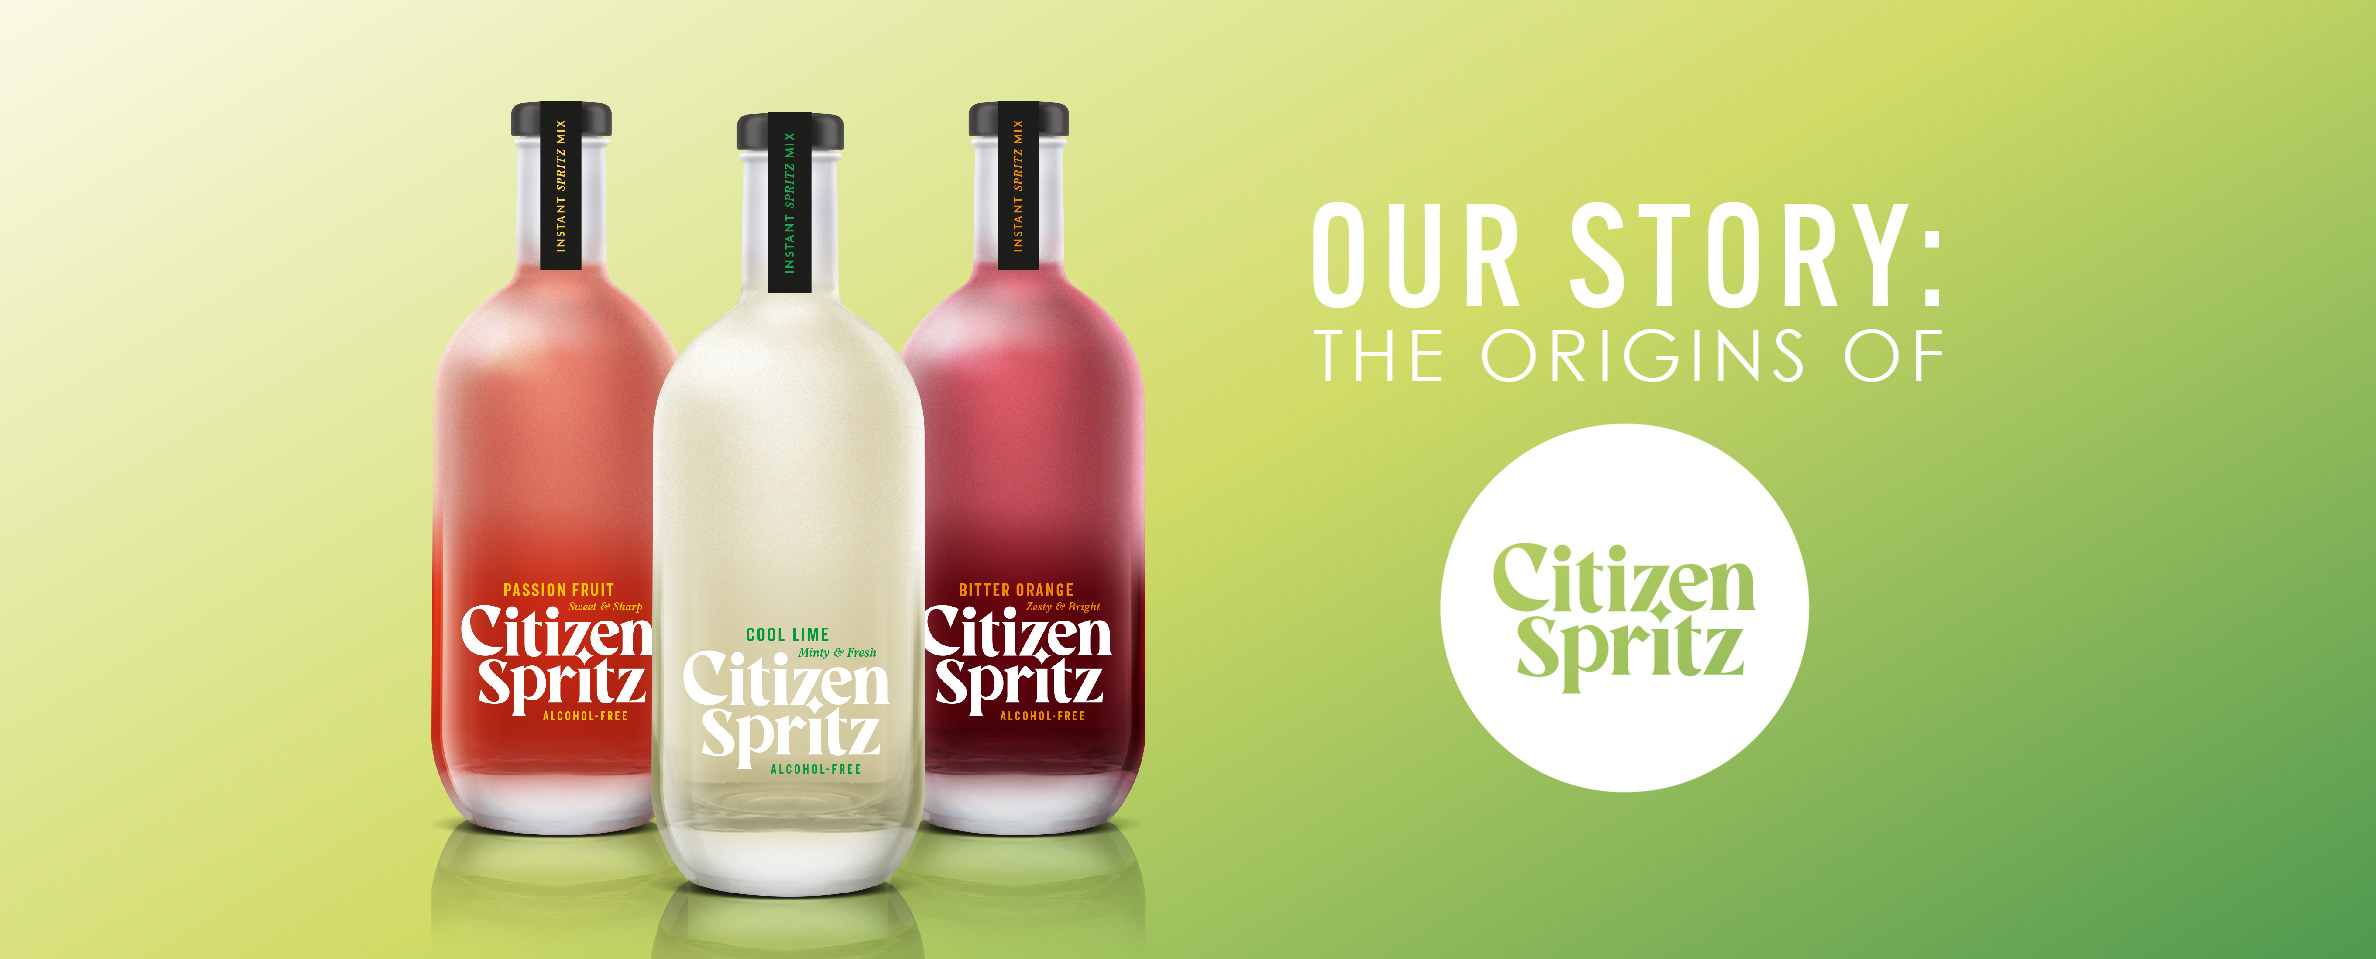 Our story: The origins of Citizen Spritz feature image